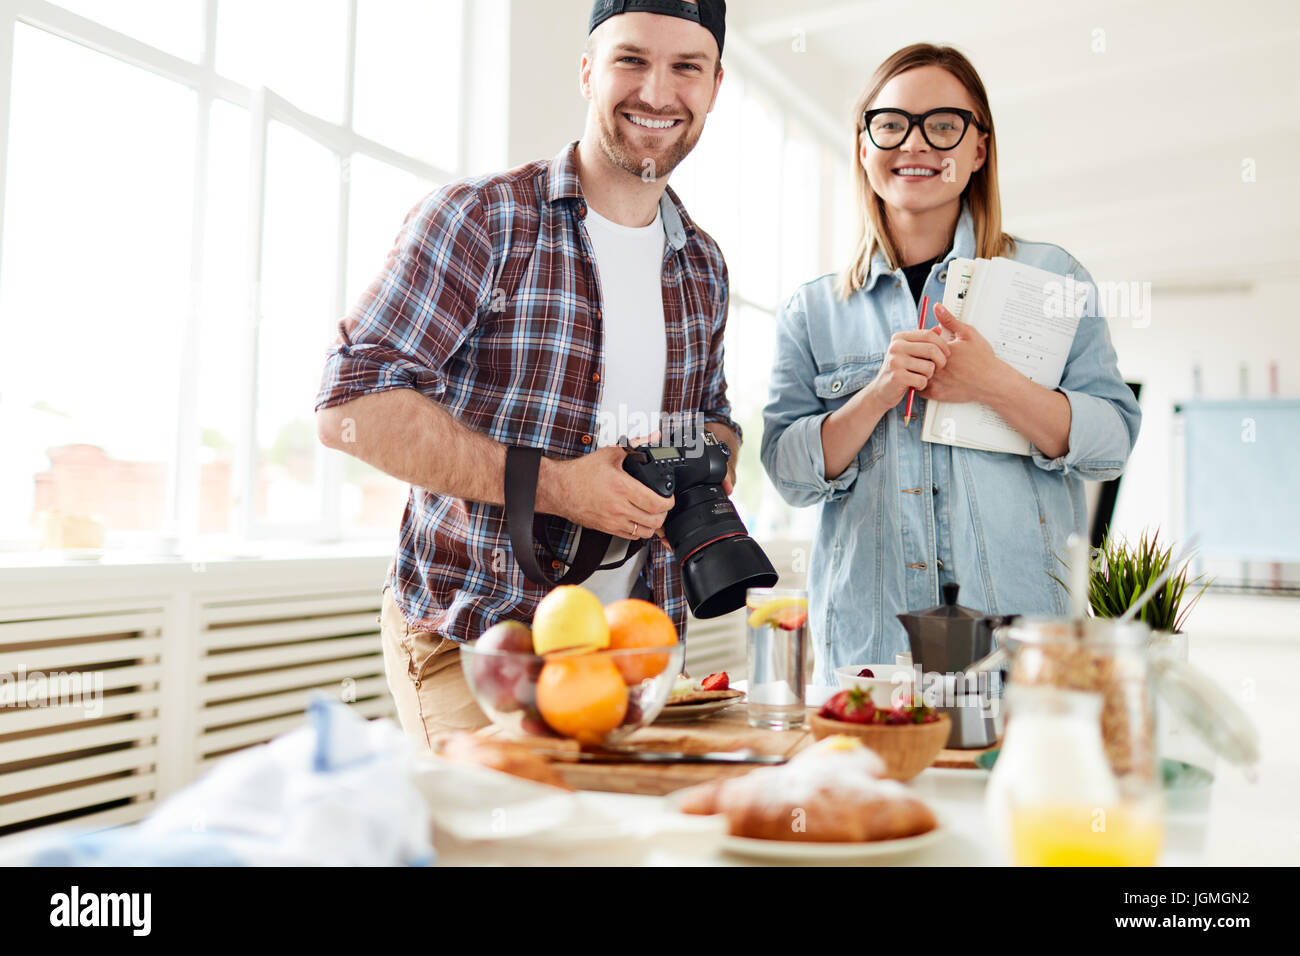 Young photographer and stylist standing by table with food Stock Photo